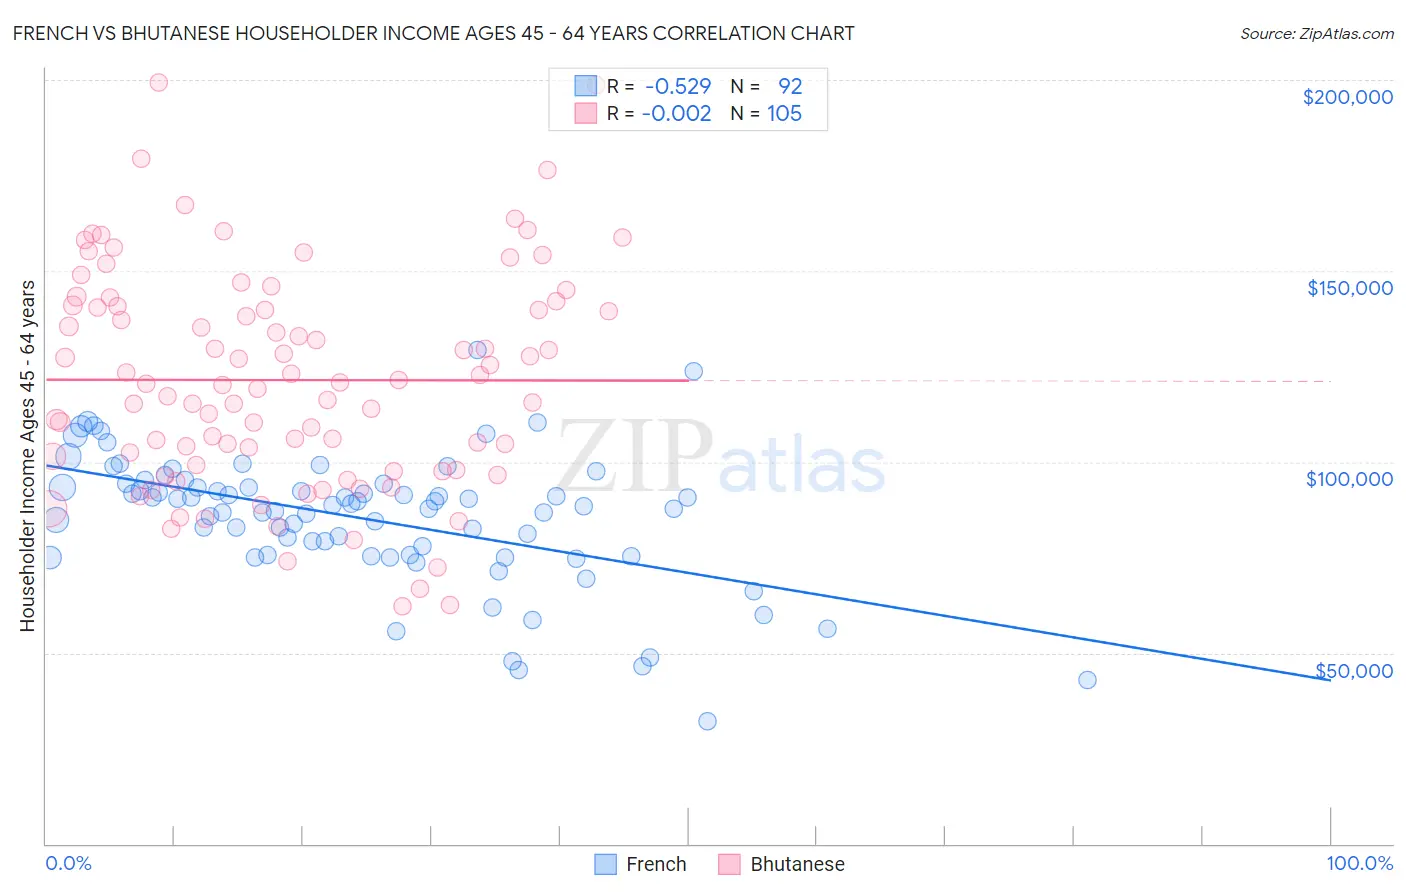 French vs Bhutanese Householder Income Ages 45 - 64 years